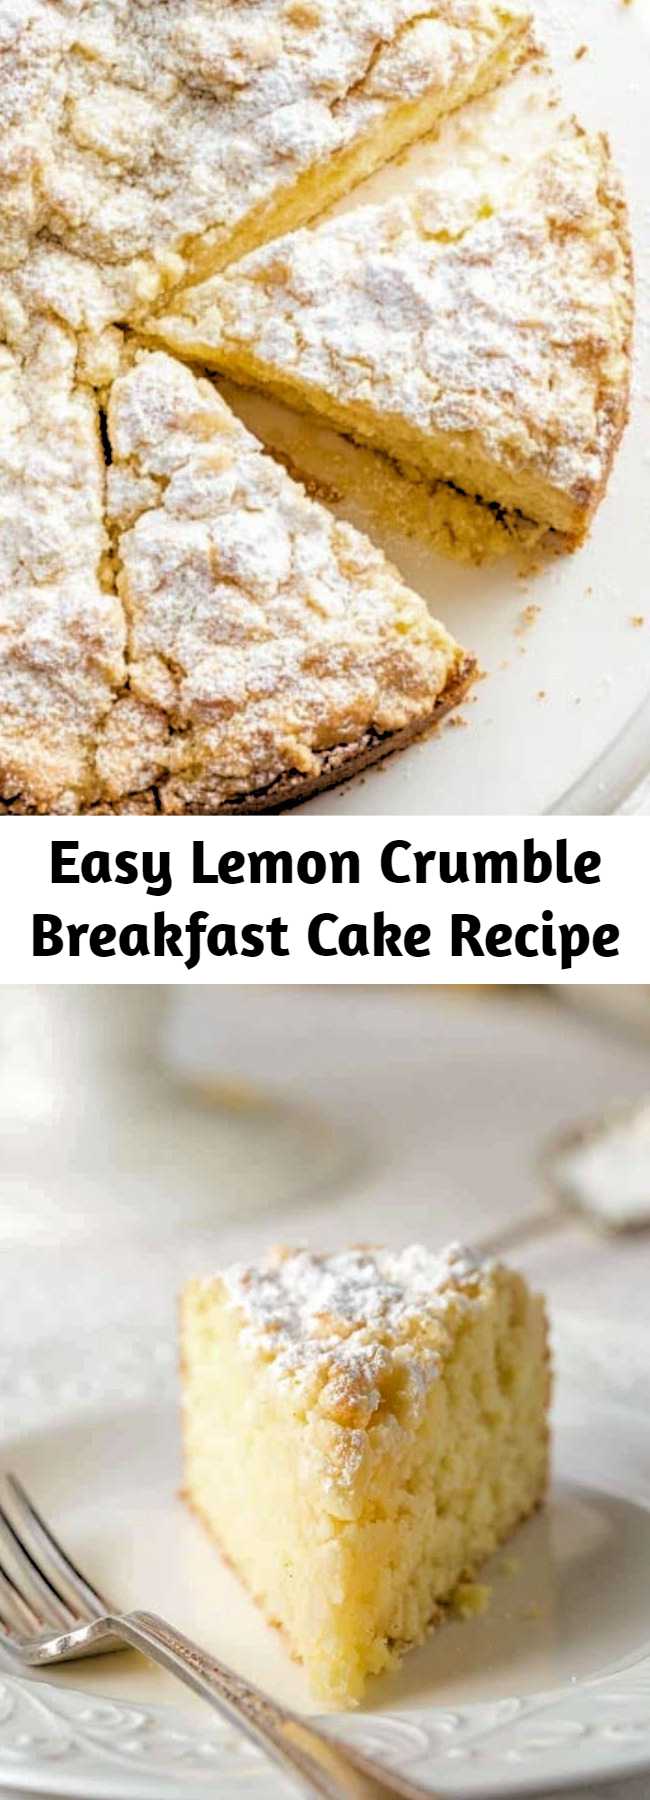 An easy to make breakfast cake with a moist, tender crumb topped with a sweet crumble topping.